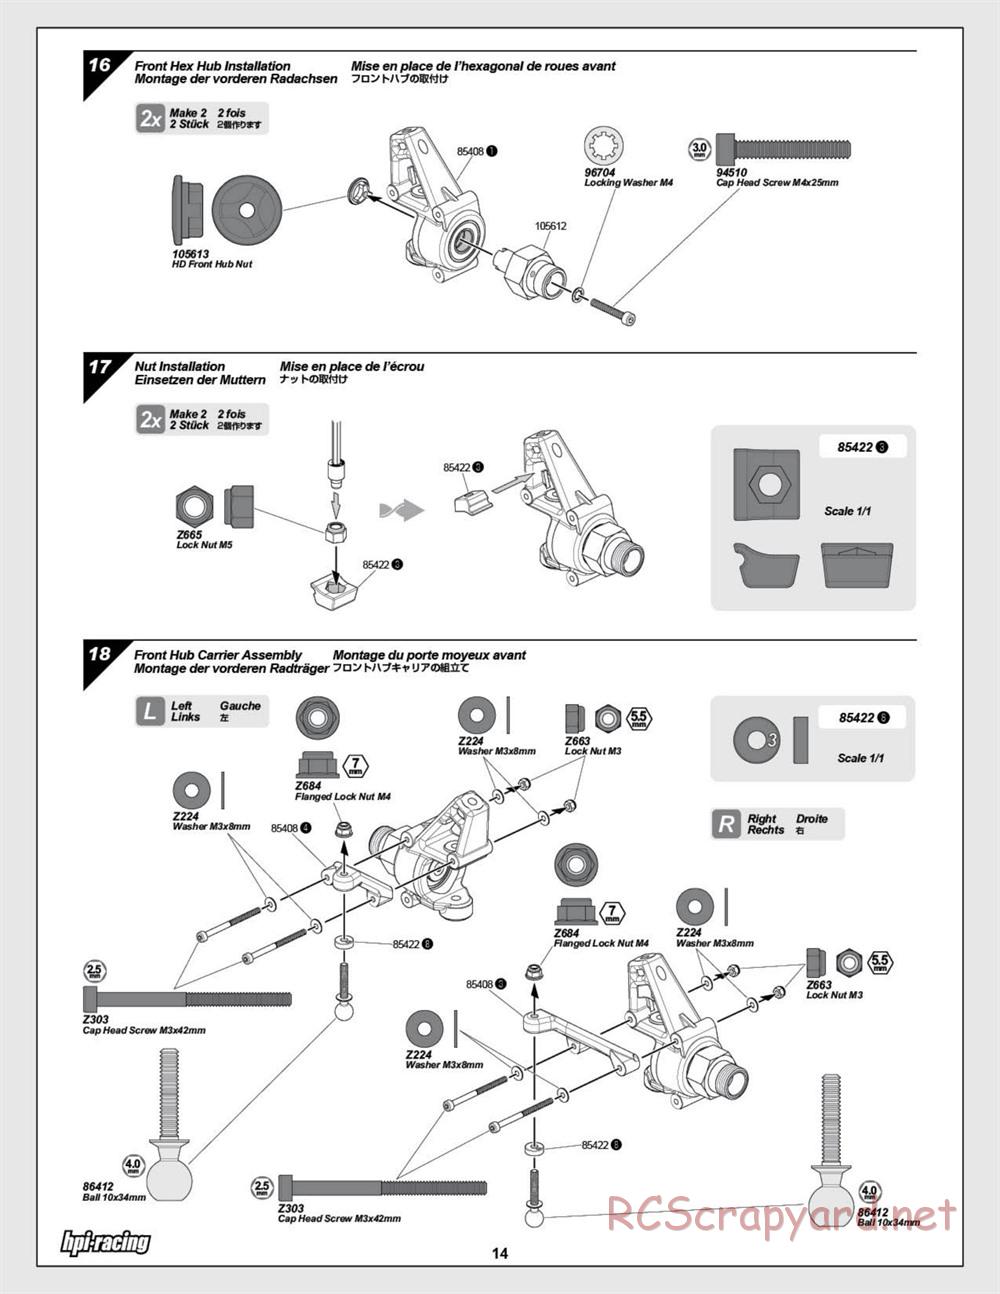 HPI - Baja 5SC SS - Exploded View - Page 14